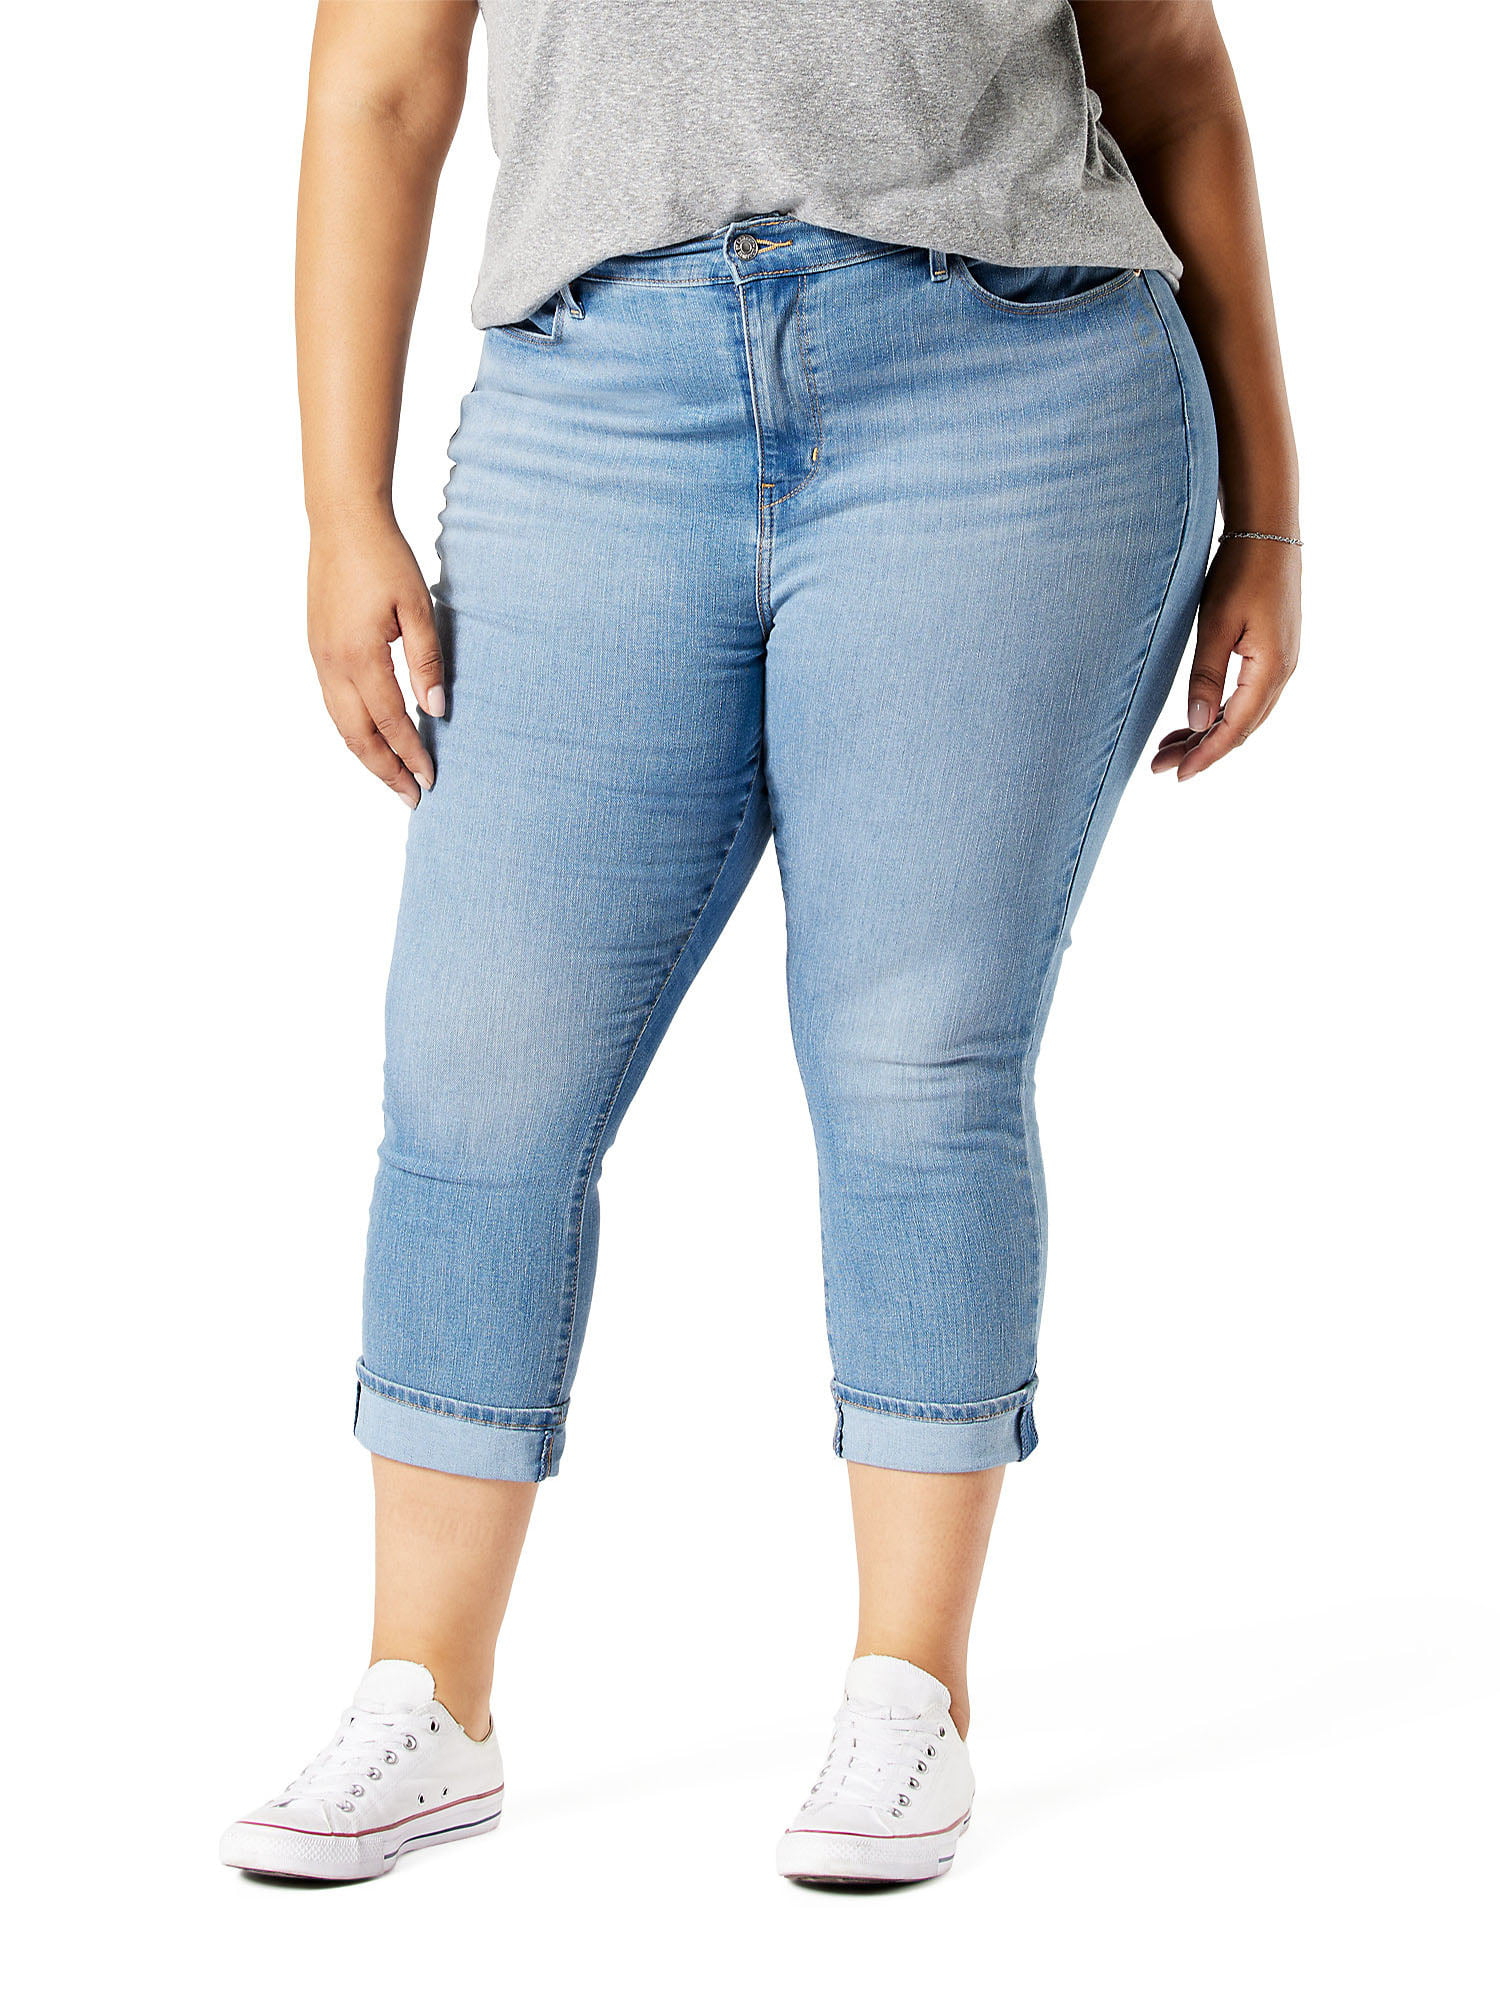 Signature by Levi Strauss & Co. Women's and Women's Plus Mid Rise Capri Jeans, Sizes 0-28 - image 1 of 7